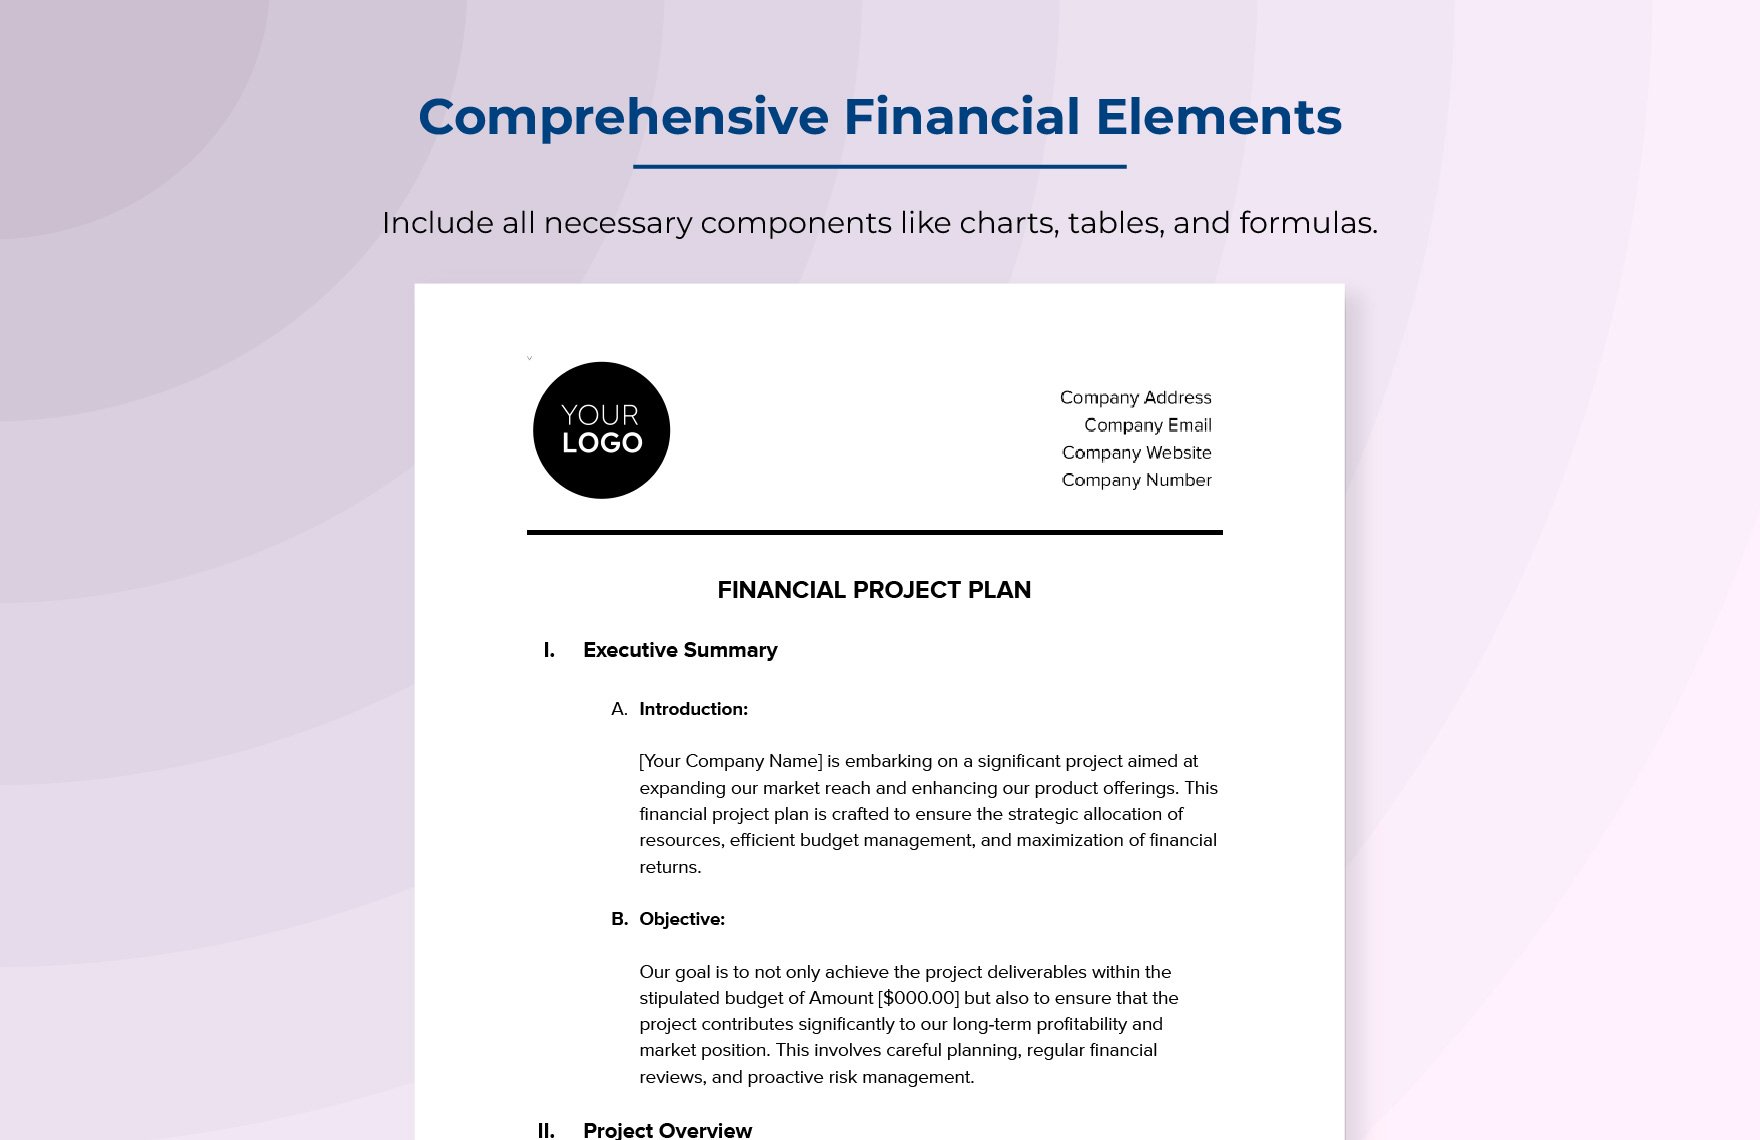 Financial Project Plan Template